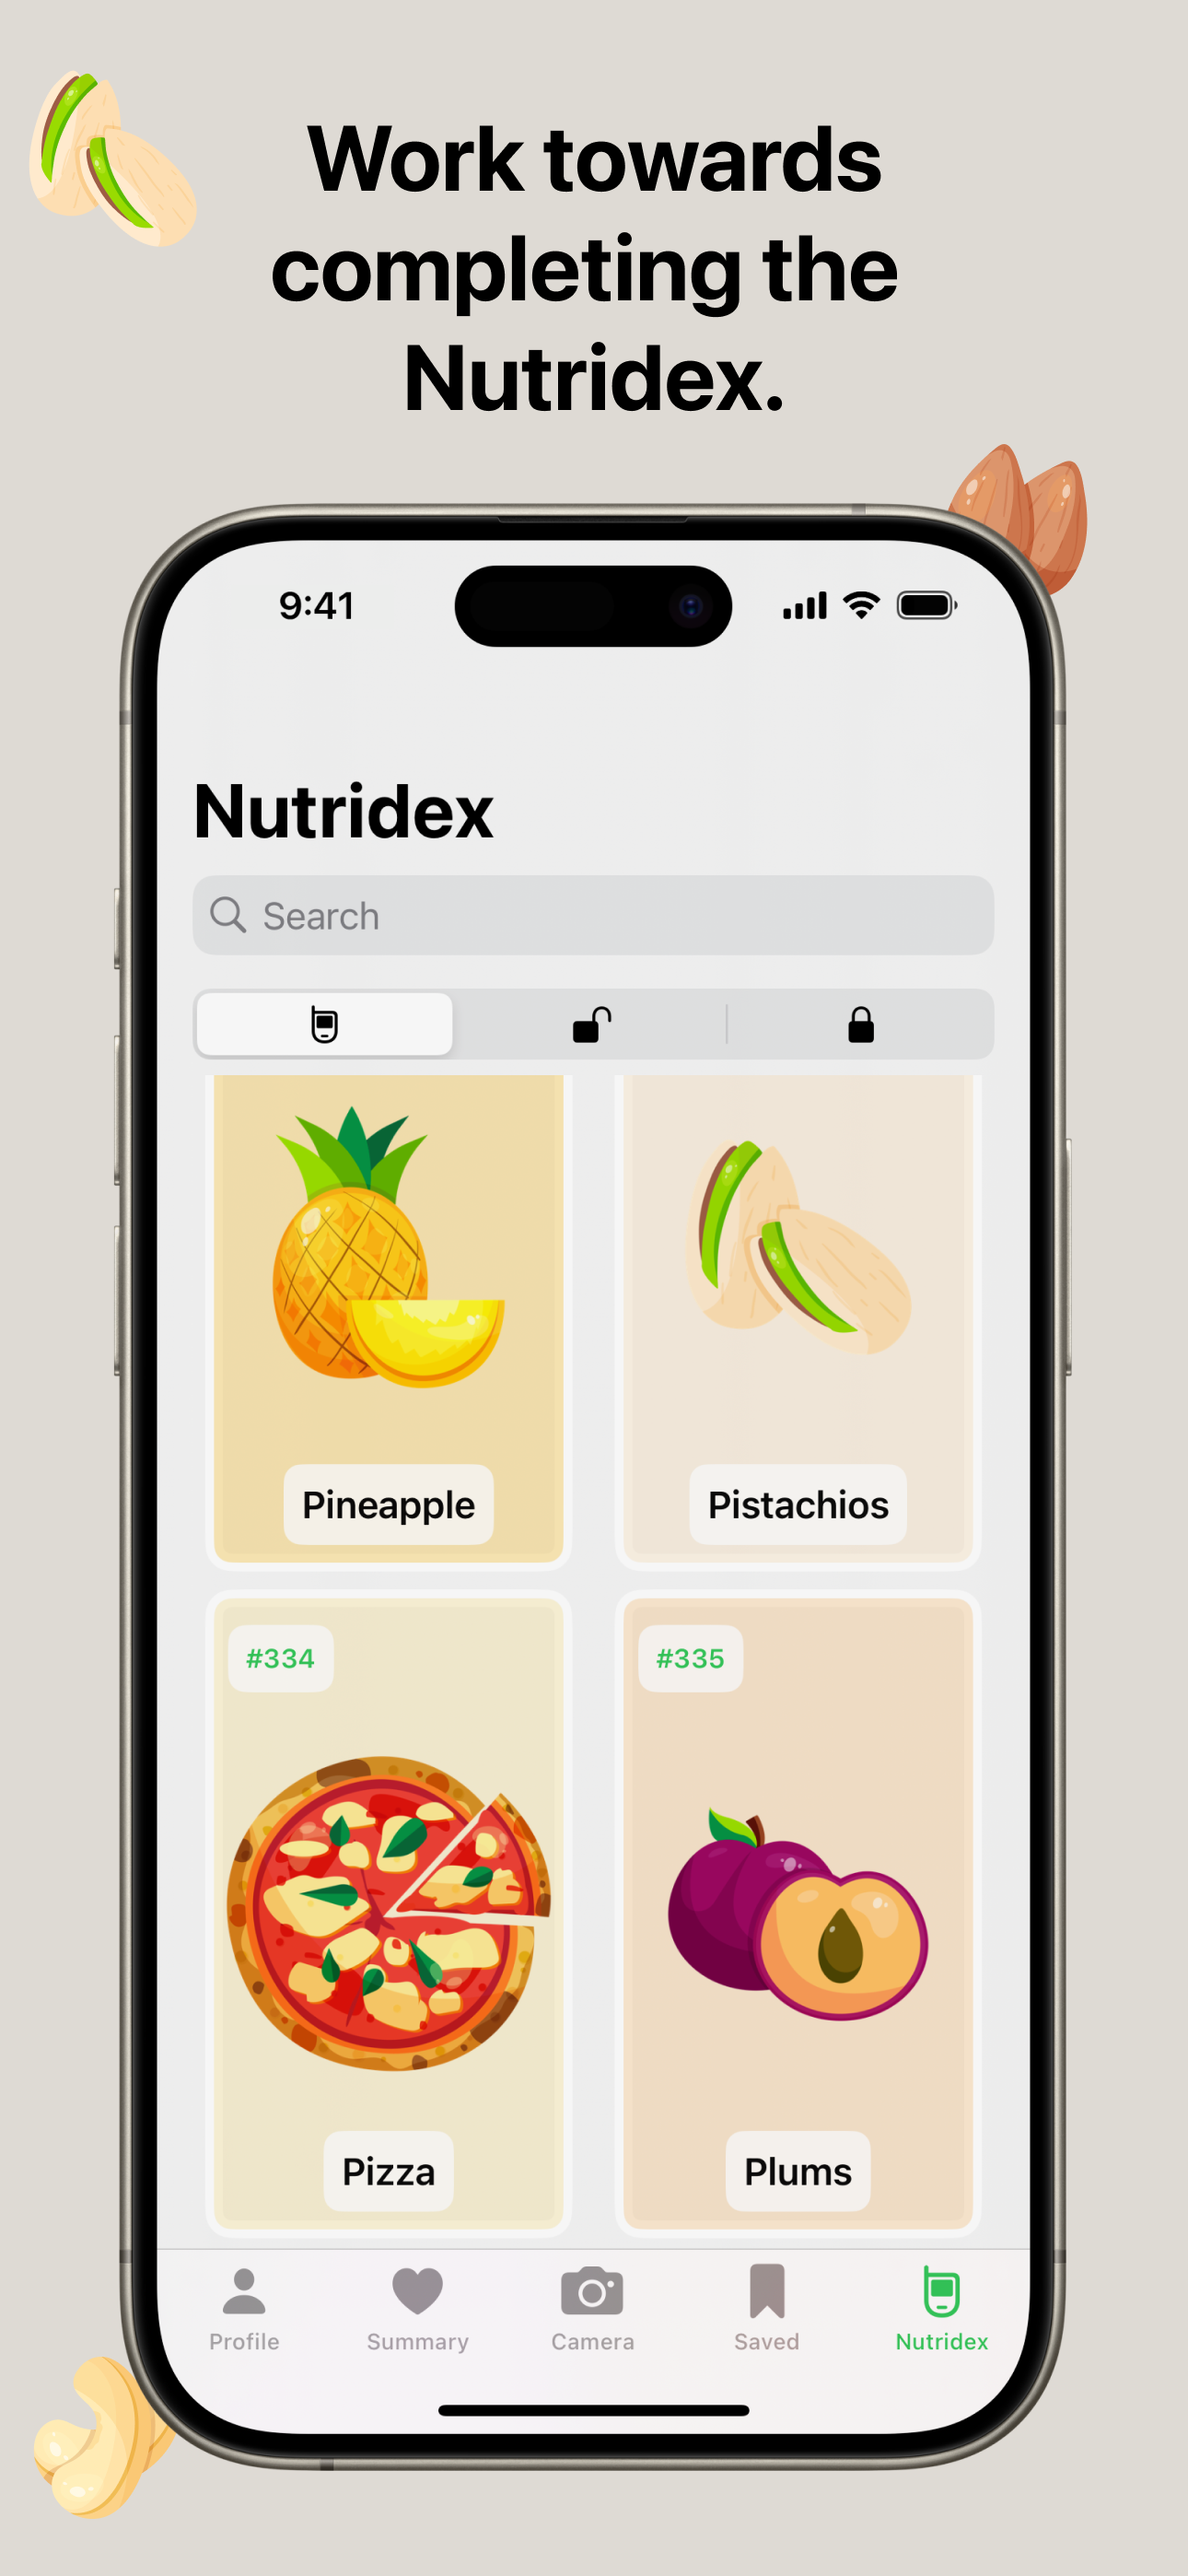 Nutrify app screenshot: A smartphone screen displaying the 'Nutridex' section with the title 'Work towards completing the Nutridex.' The screen shows various food items such as pineapple, pistachios, pizza (#334), and plums (#335). There is a search bar at the top. The background is light grey with various nut icons.